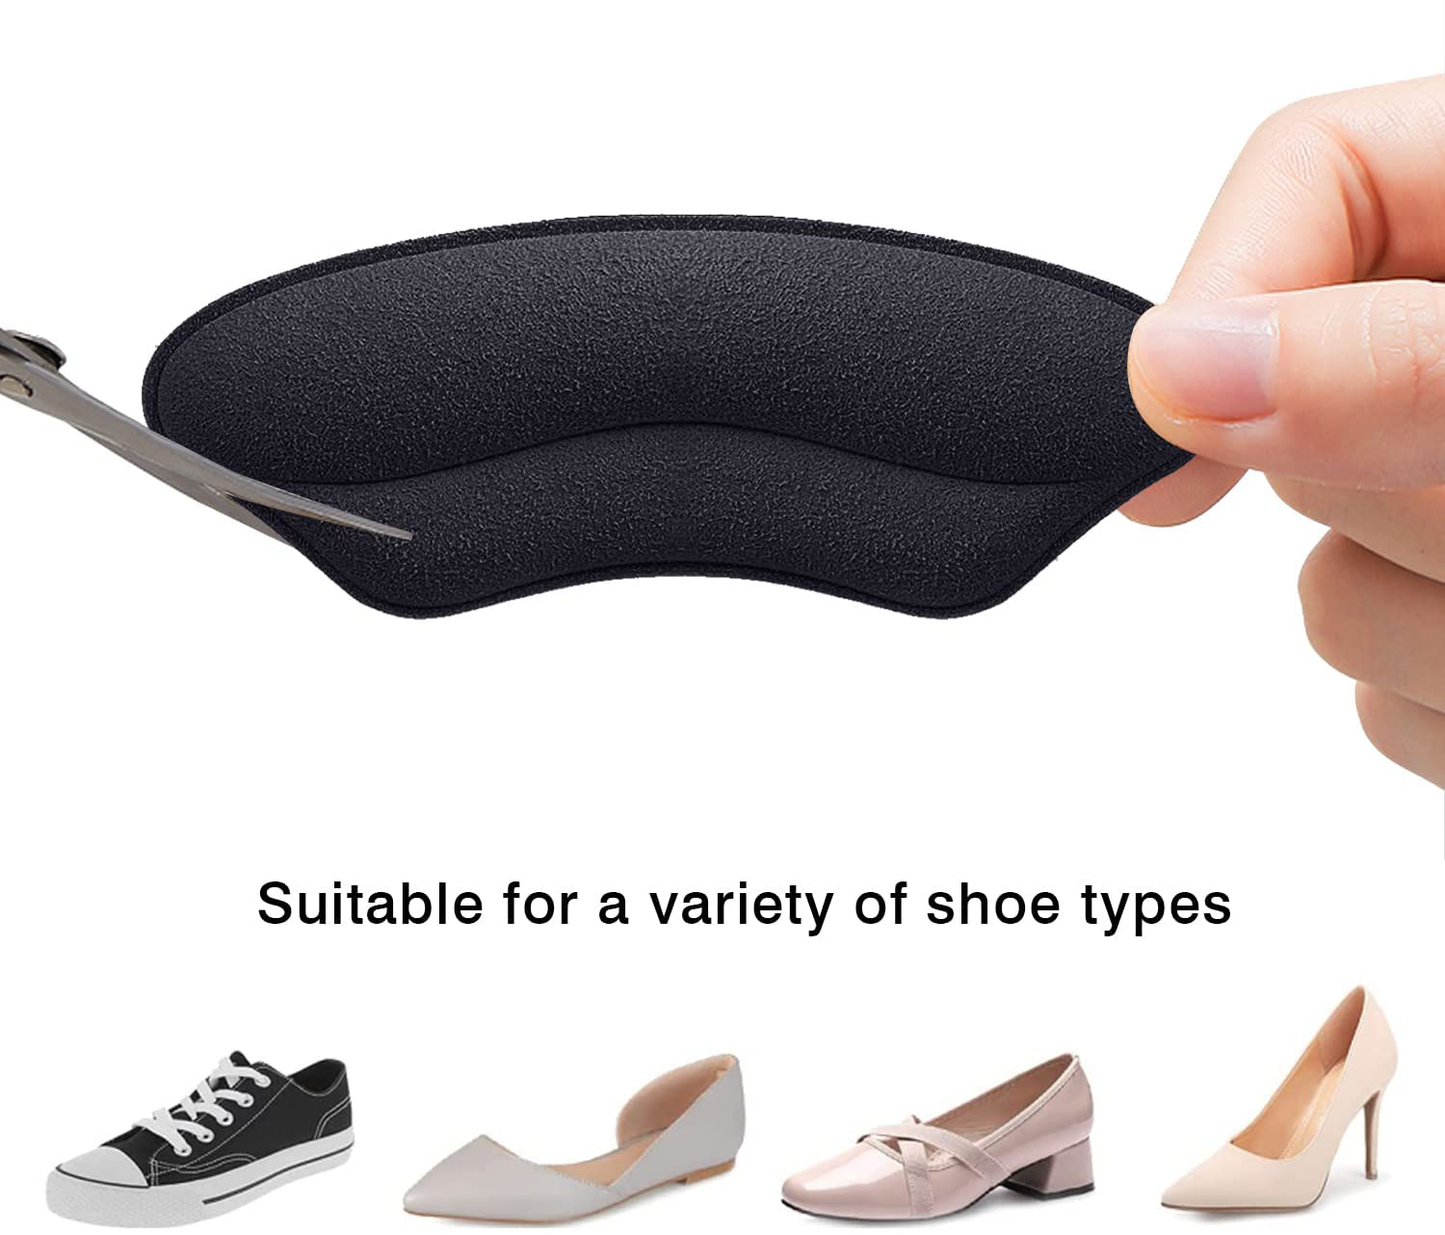 Owill 4 Pairs Self-Adhesive Heel Grips Liner Cushions Inserts for Loose Shoes, Improved Shoe Fit and Comfort,Prevent Heel Slip and Blister(Black +Beige)